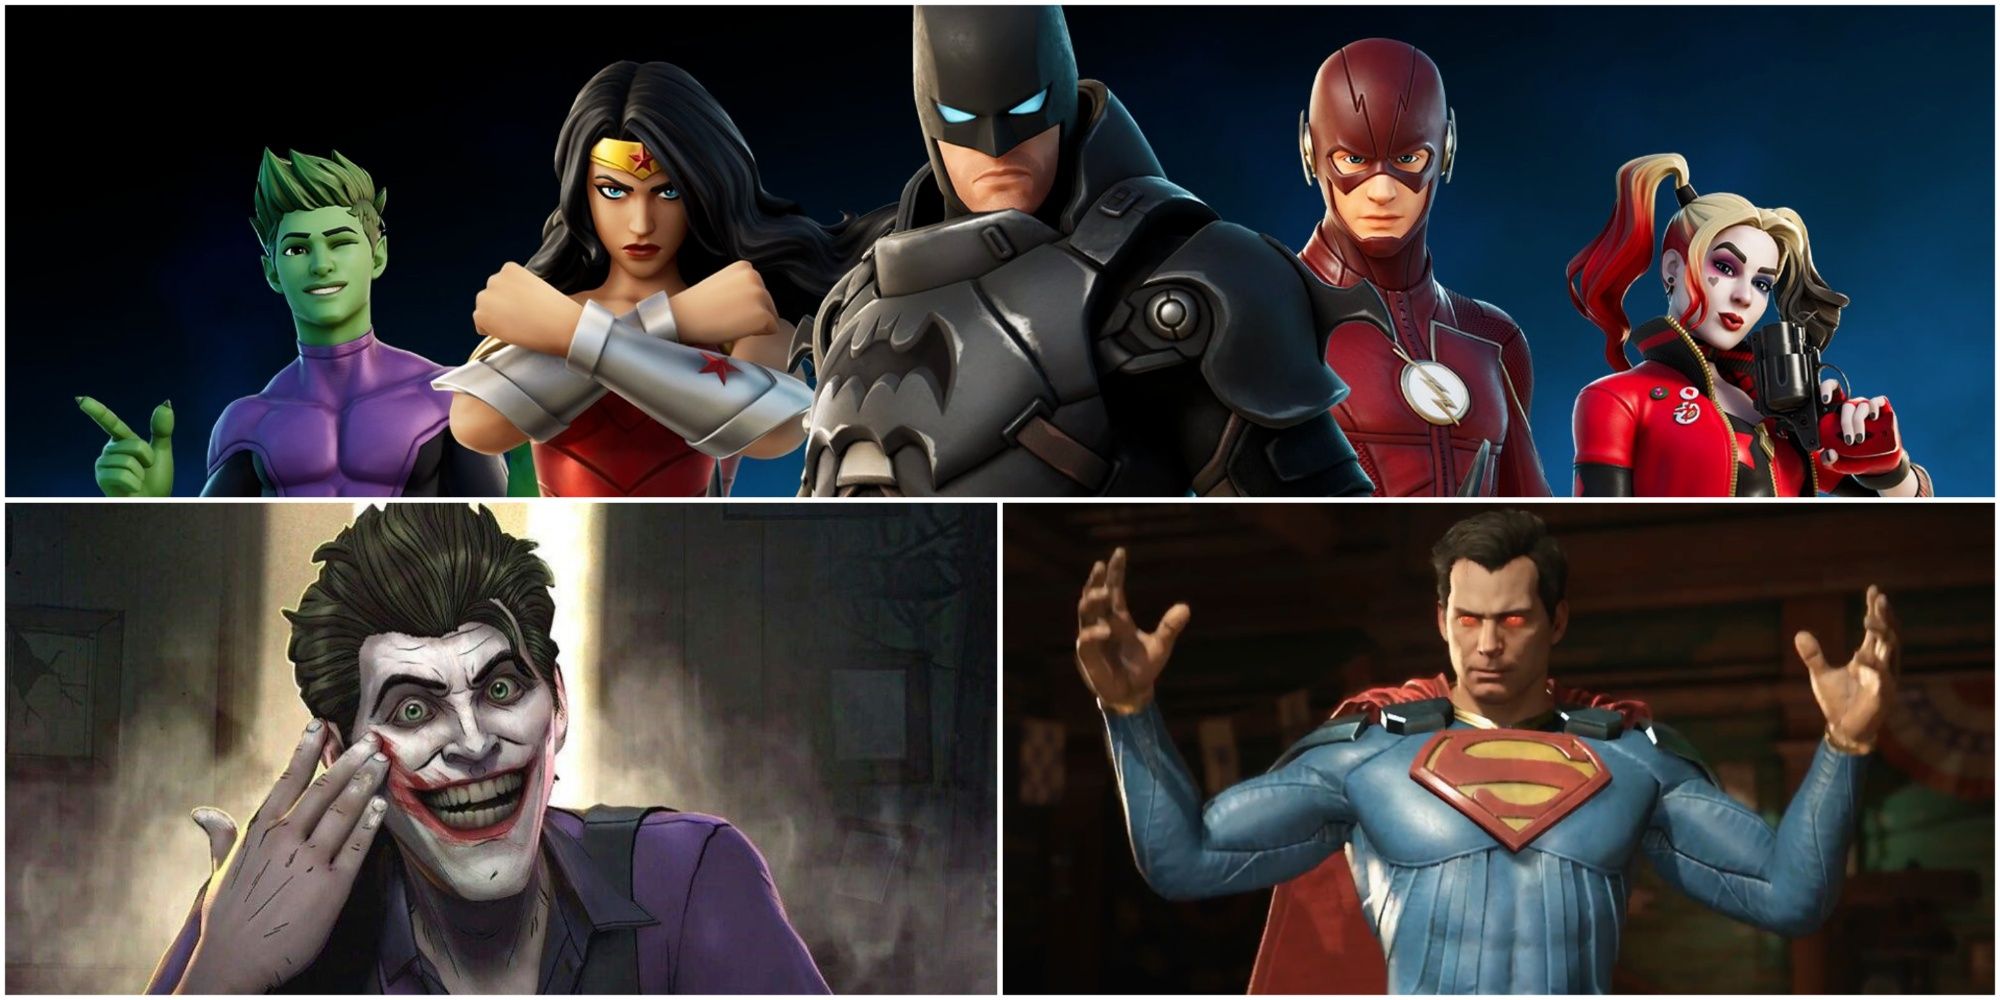 Split Image showing The Joker, Superman and other DC Characters.